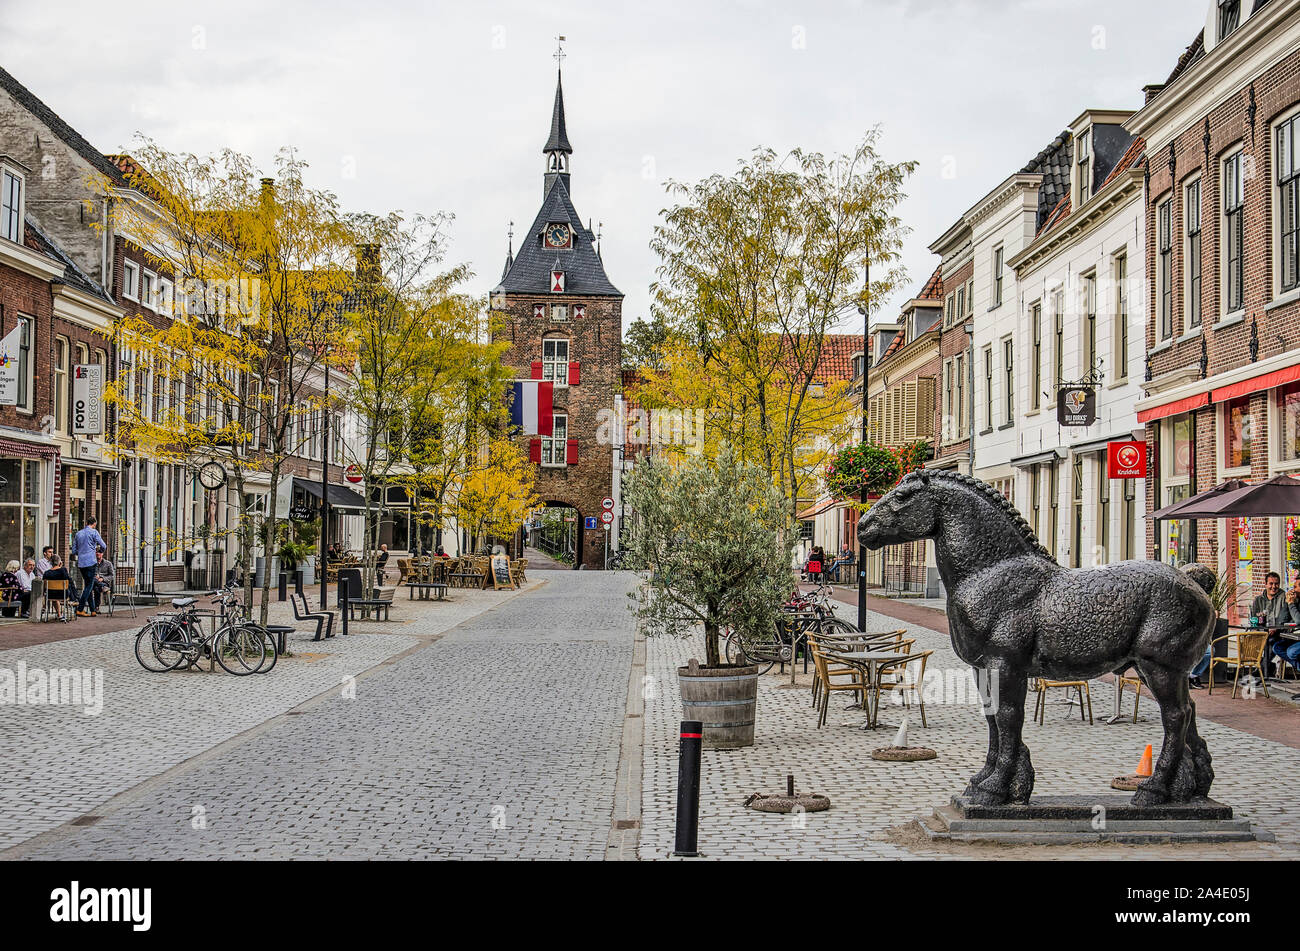 Vianen, The Netherlands, October 13, 2019: view of Voorstraat, main stret in the old town, with historic houses, tower and gate, outdoor cafes, a hors Stock Photo